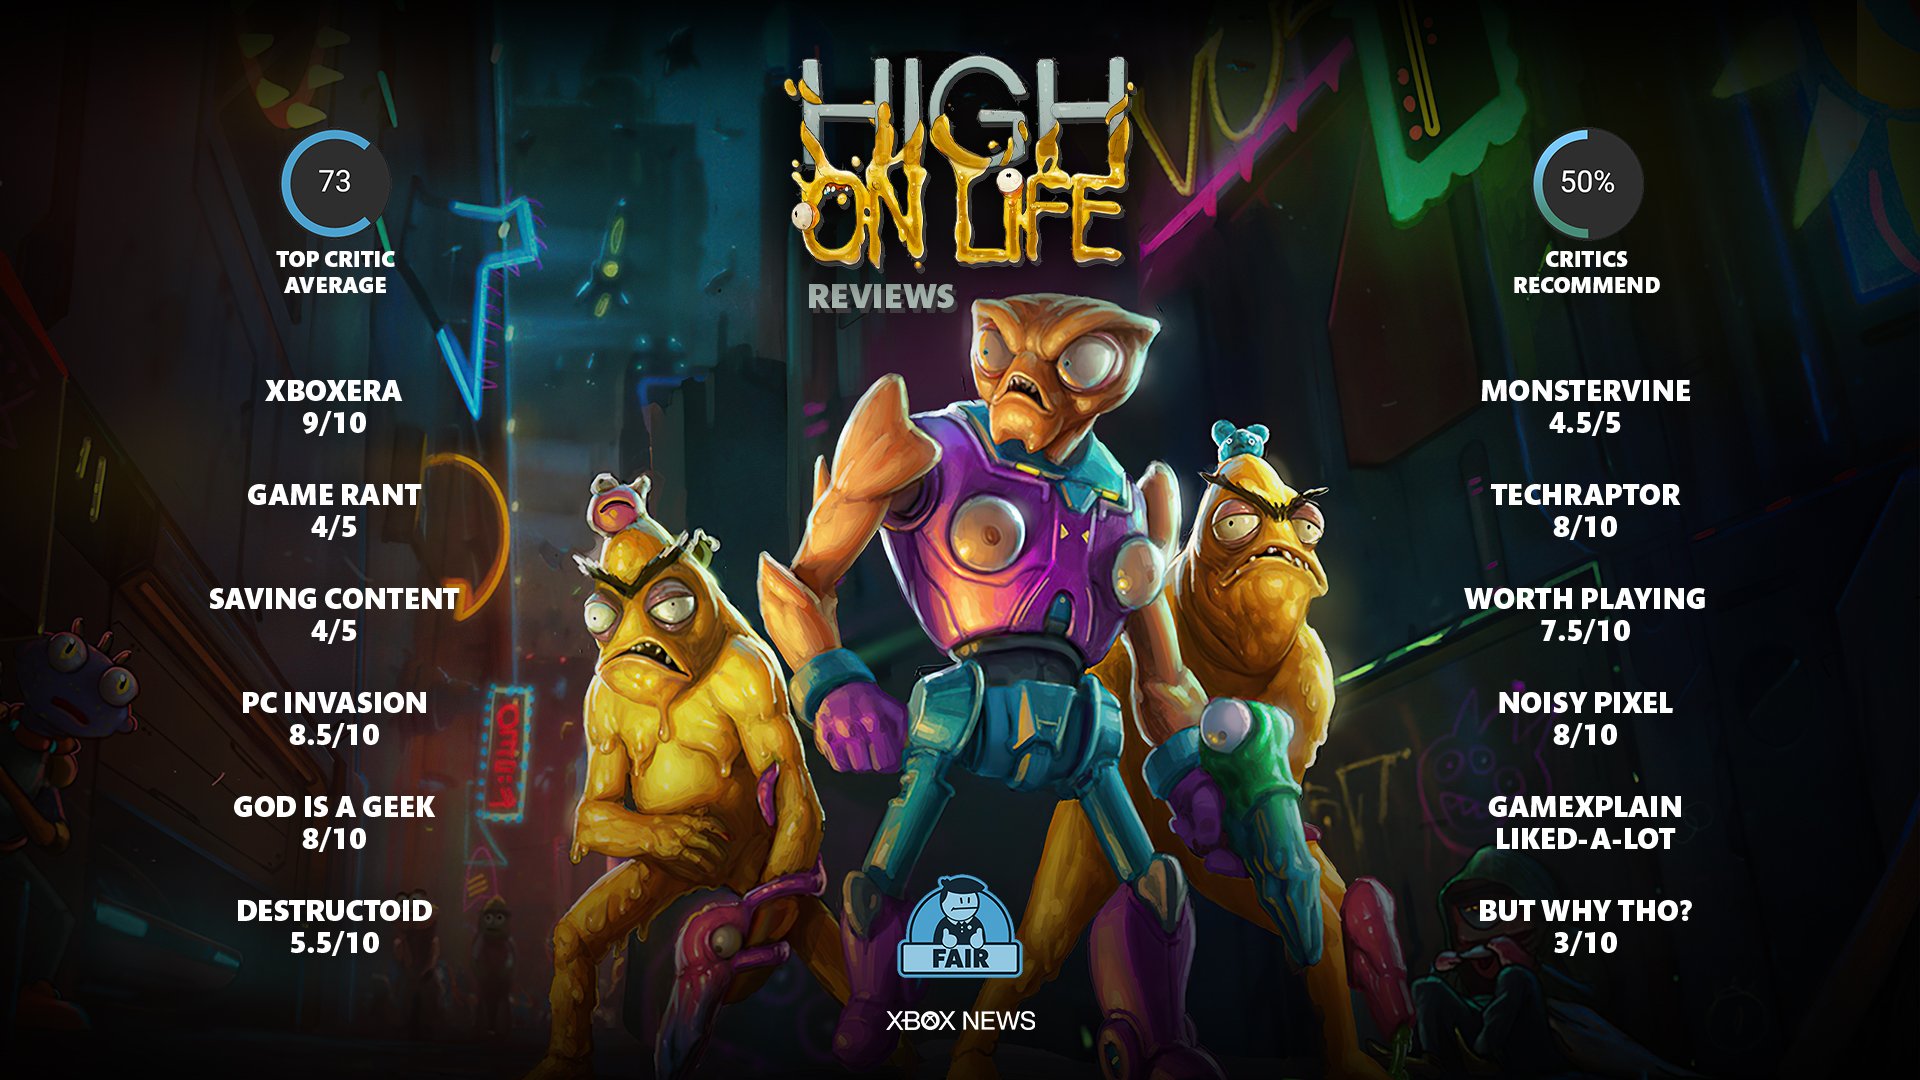 Review: High on Life – Destructoid